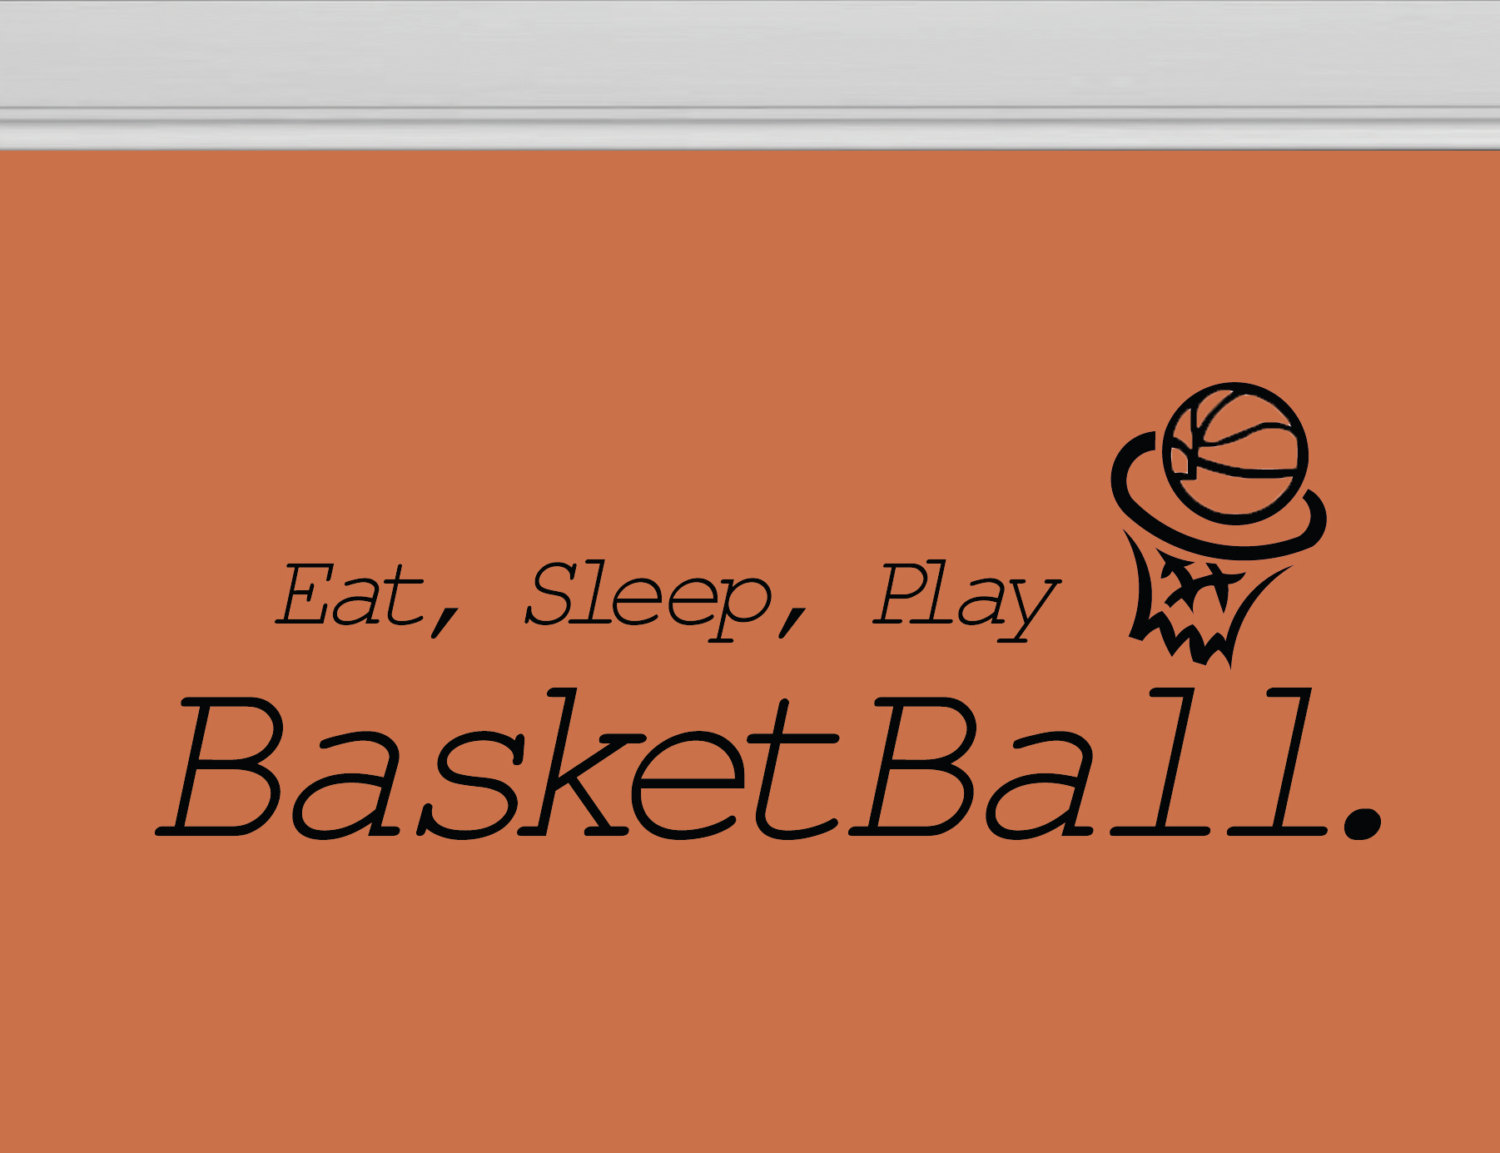 Quotes About Basketball Background. QuotesGram